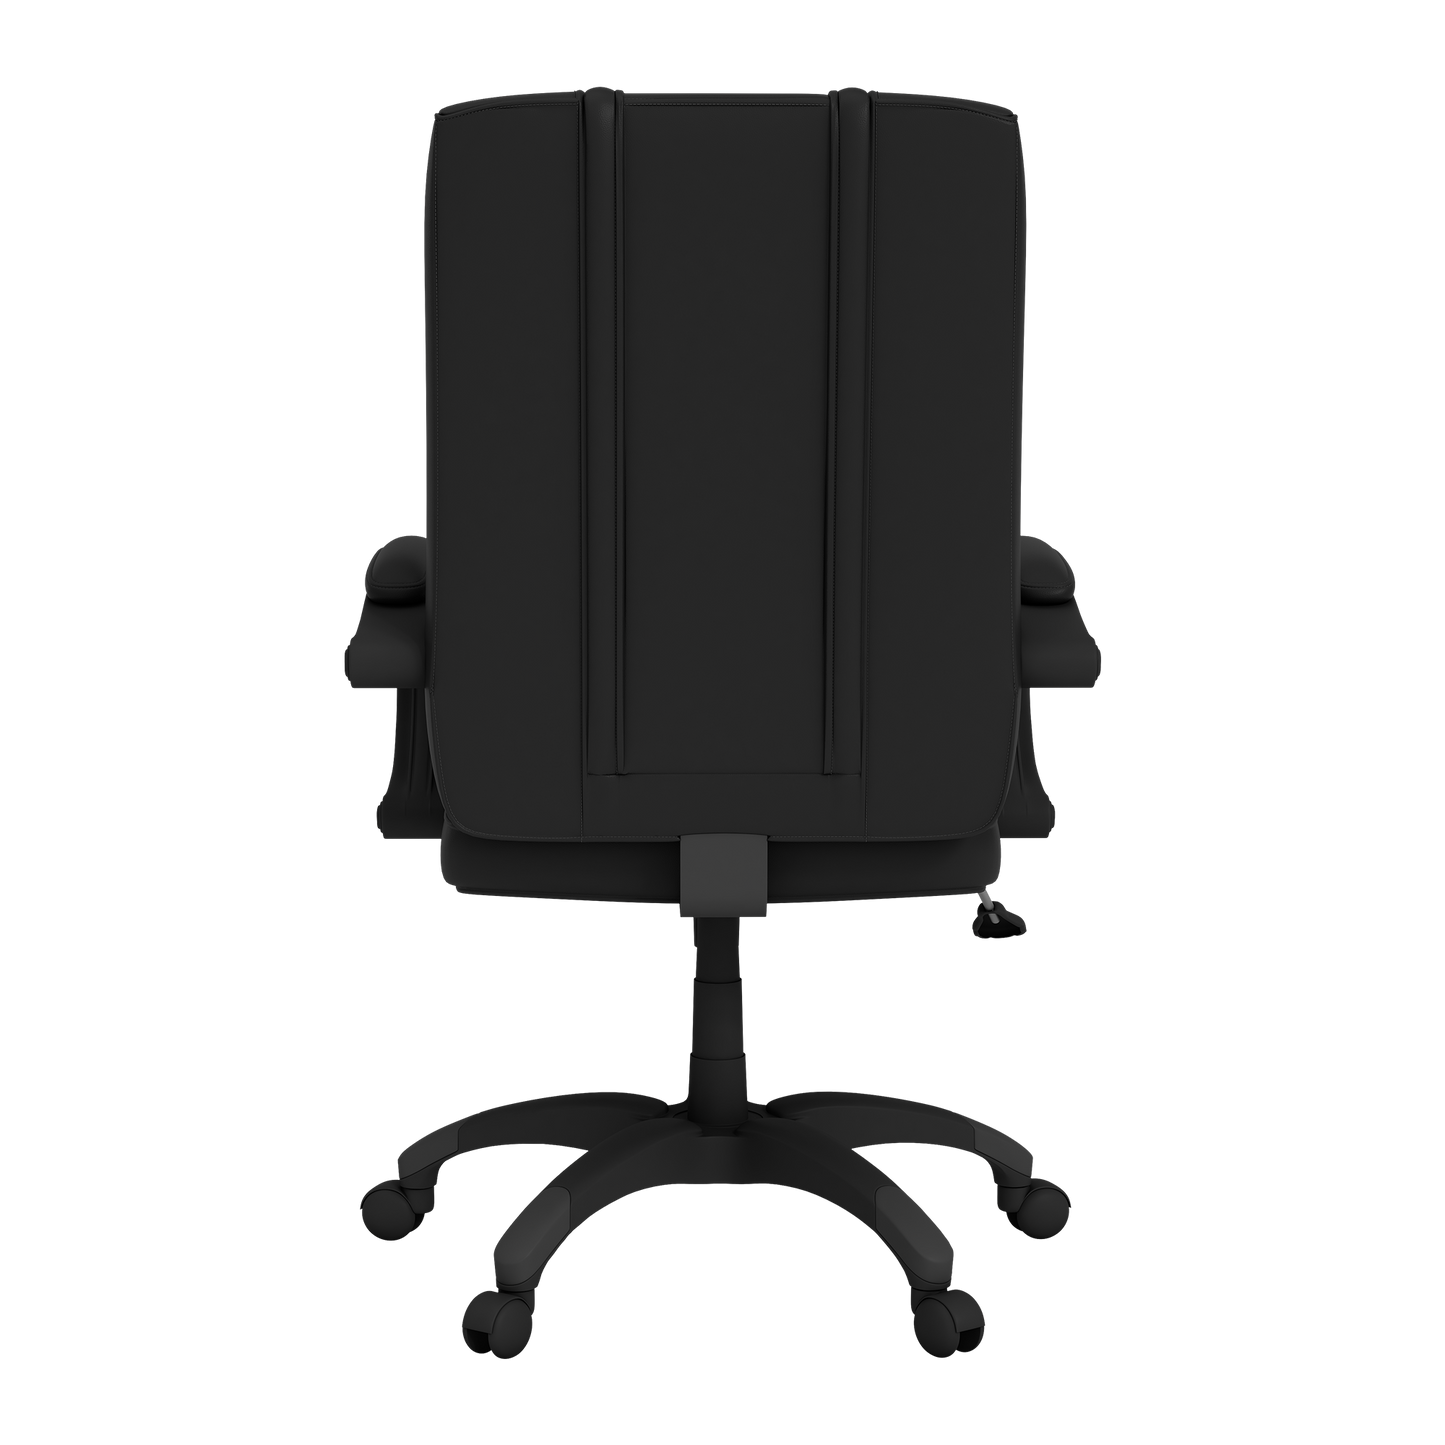 Office Chair 1000 with Los Angeles Clippers Secondary